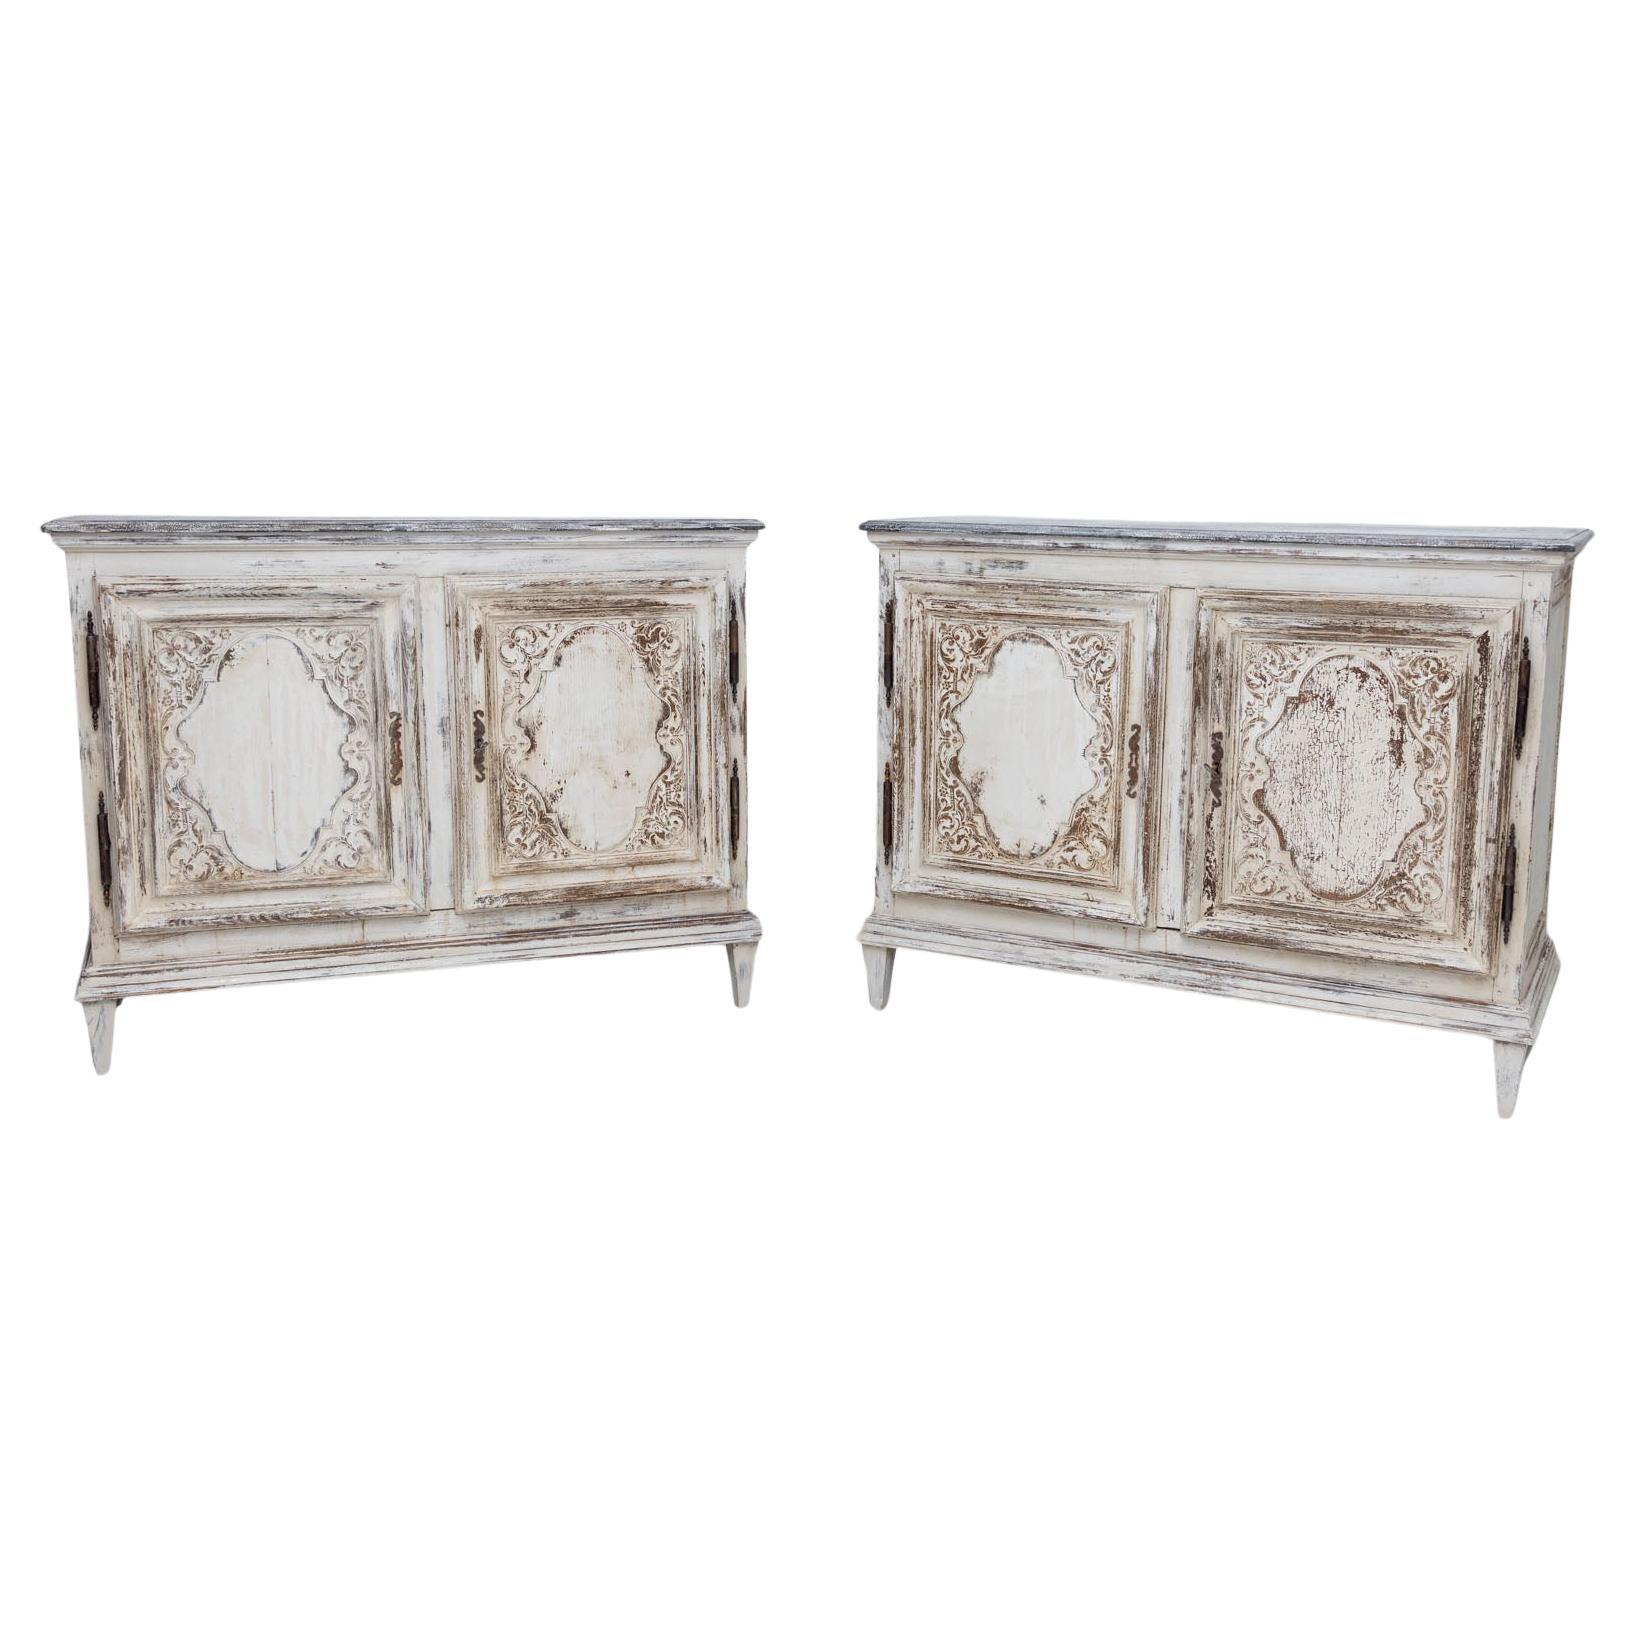 Pair of French sideboards, 18th/21st century